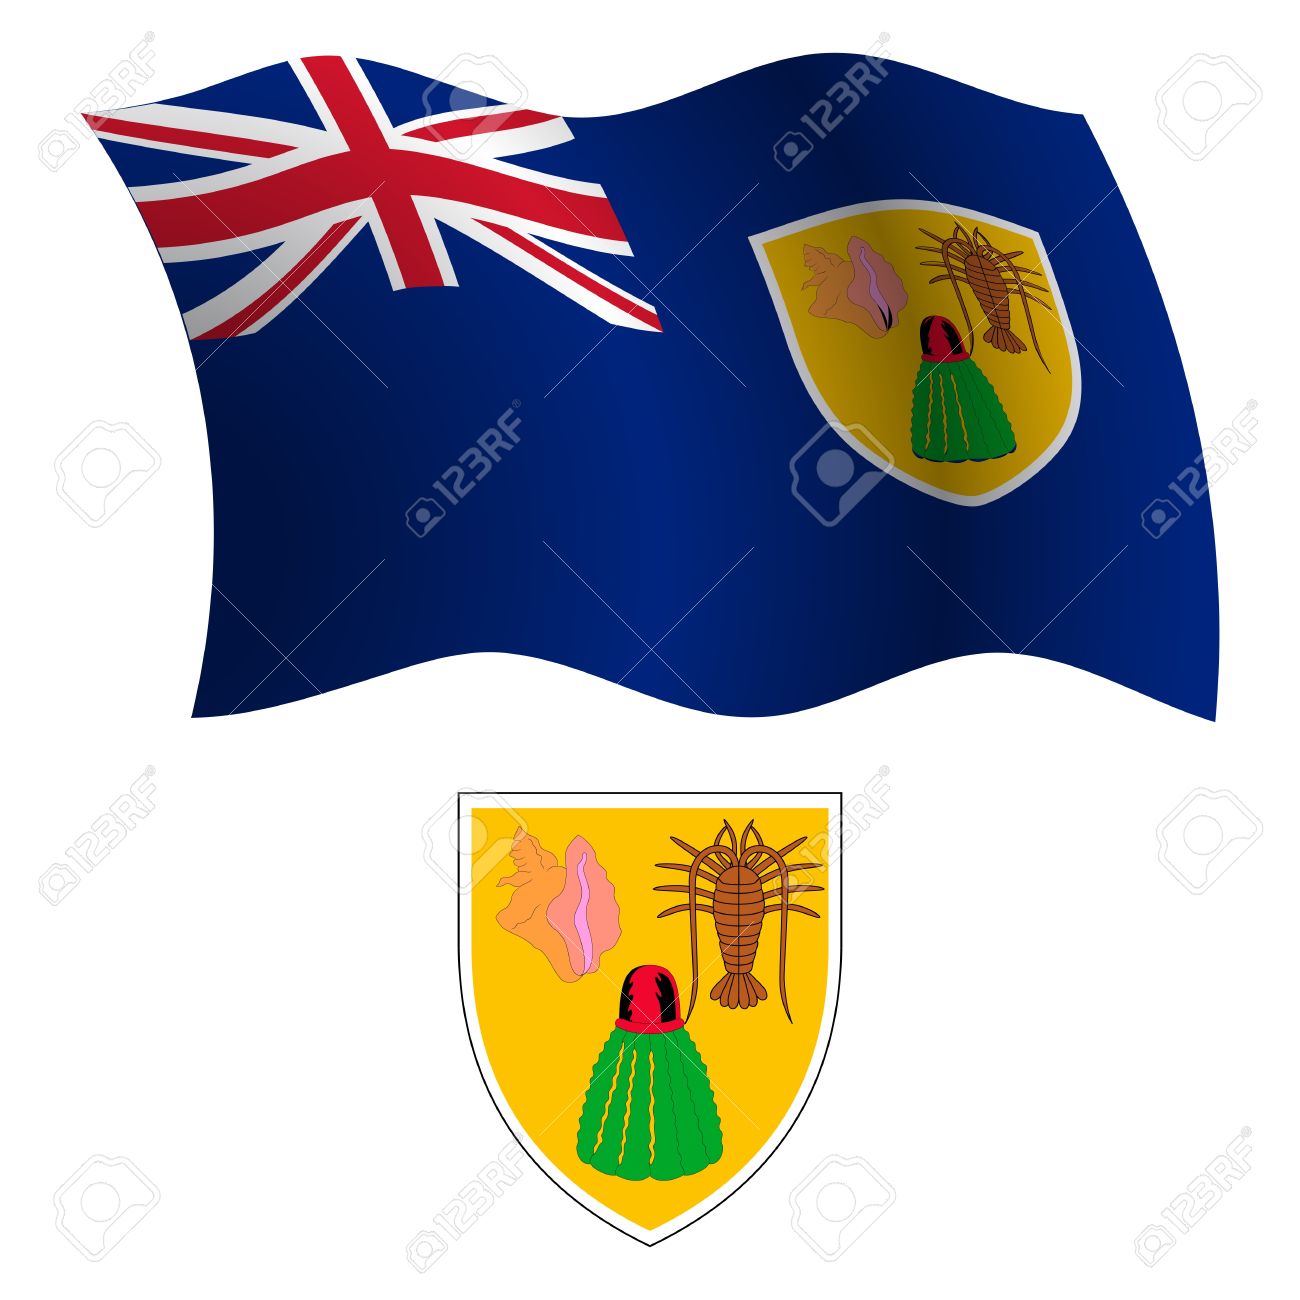 Turks And Caicos clipart #9, Download drawings